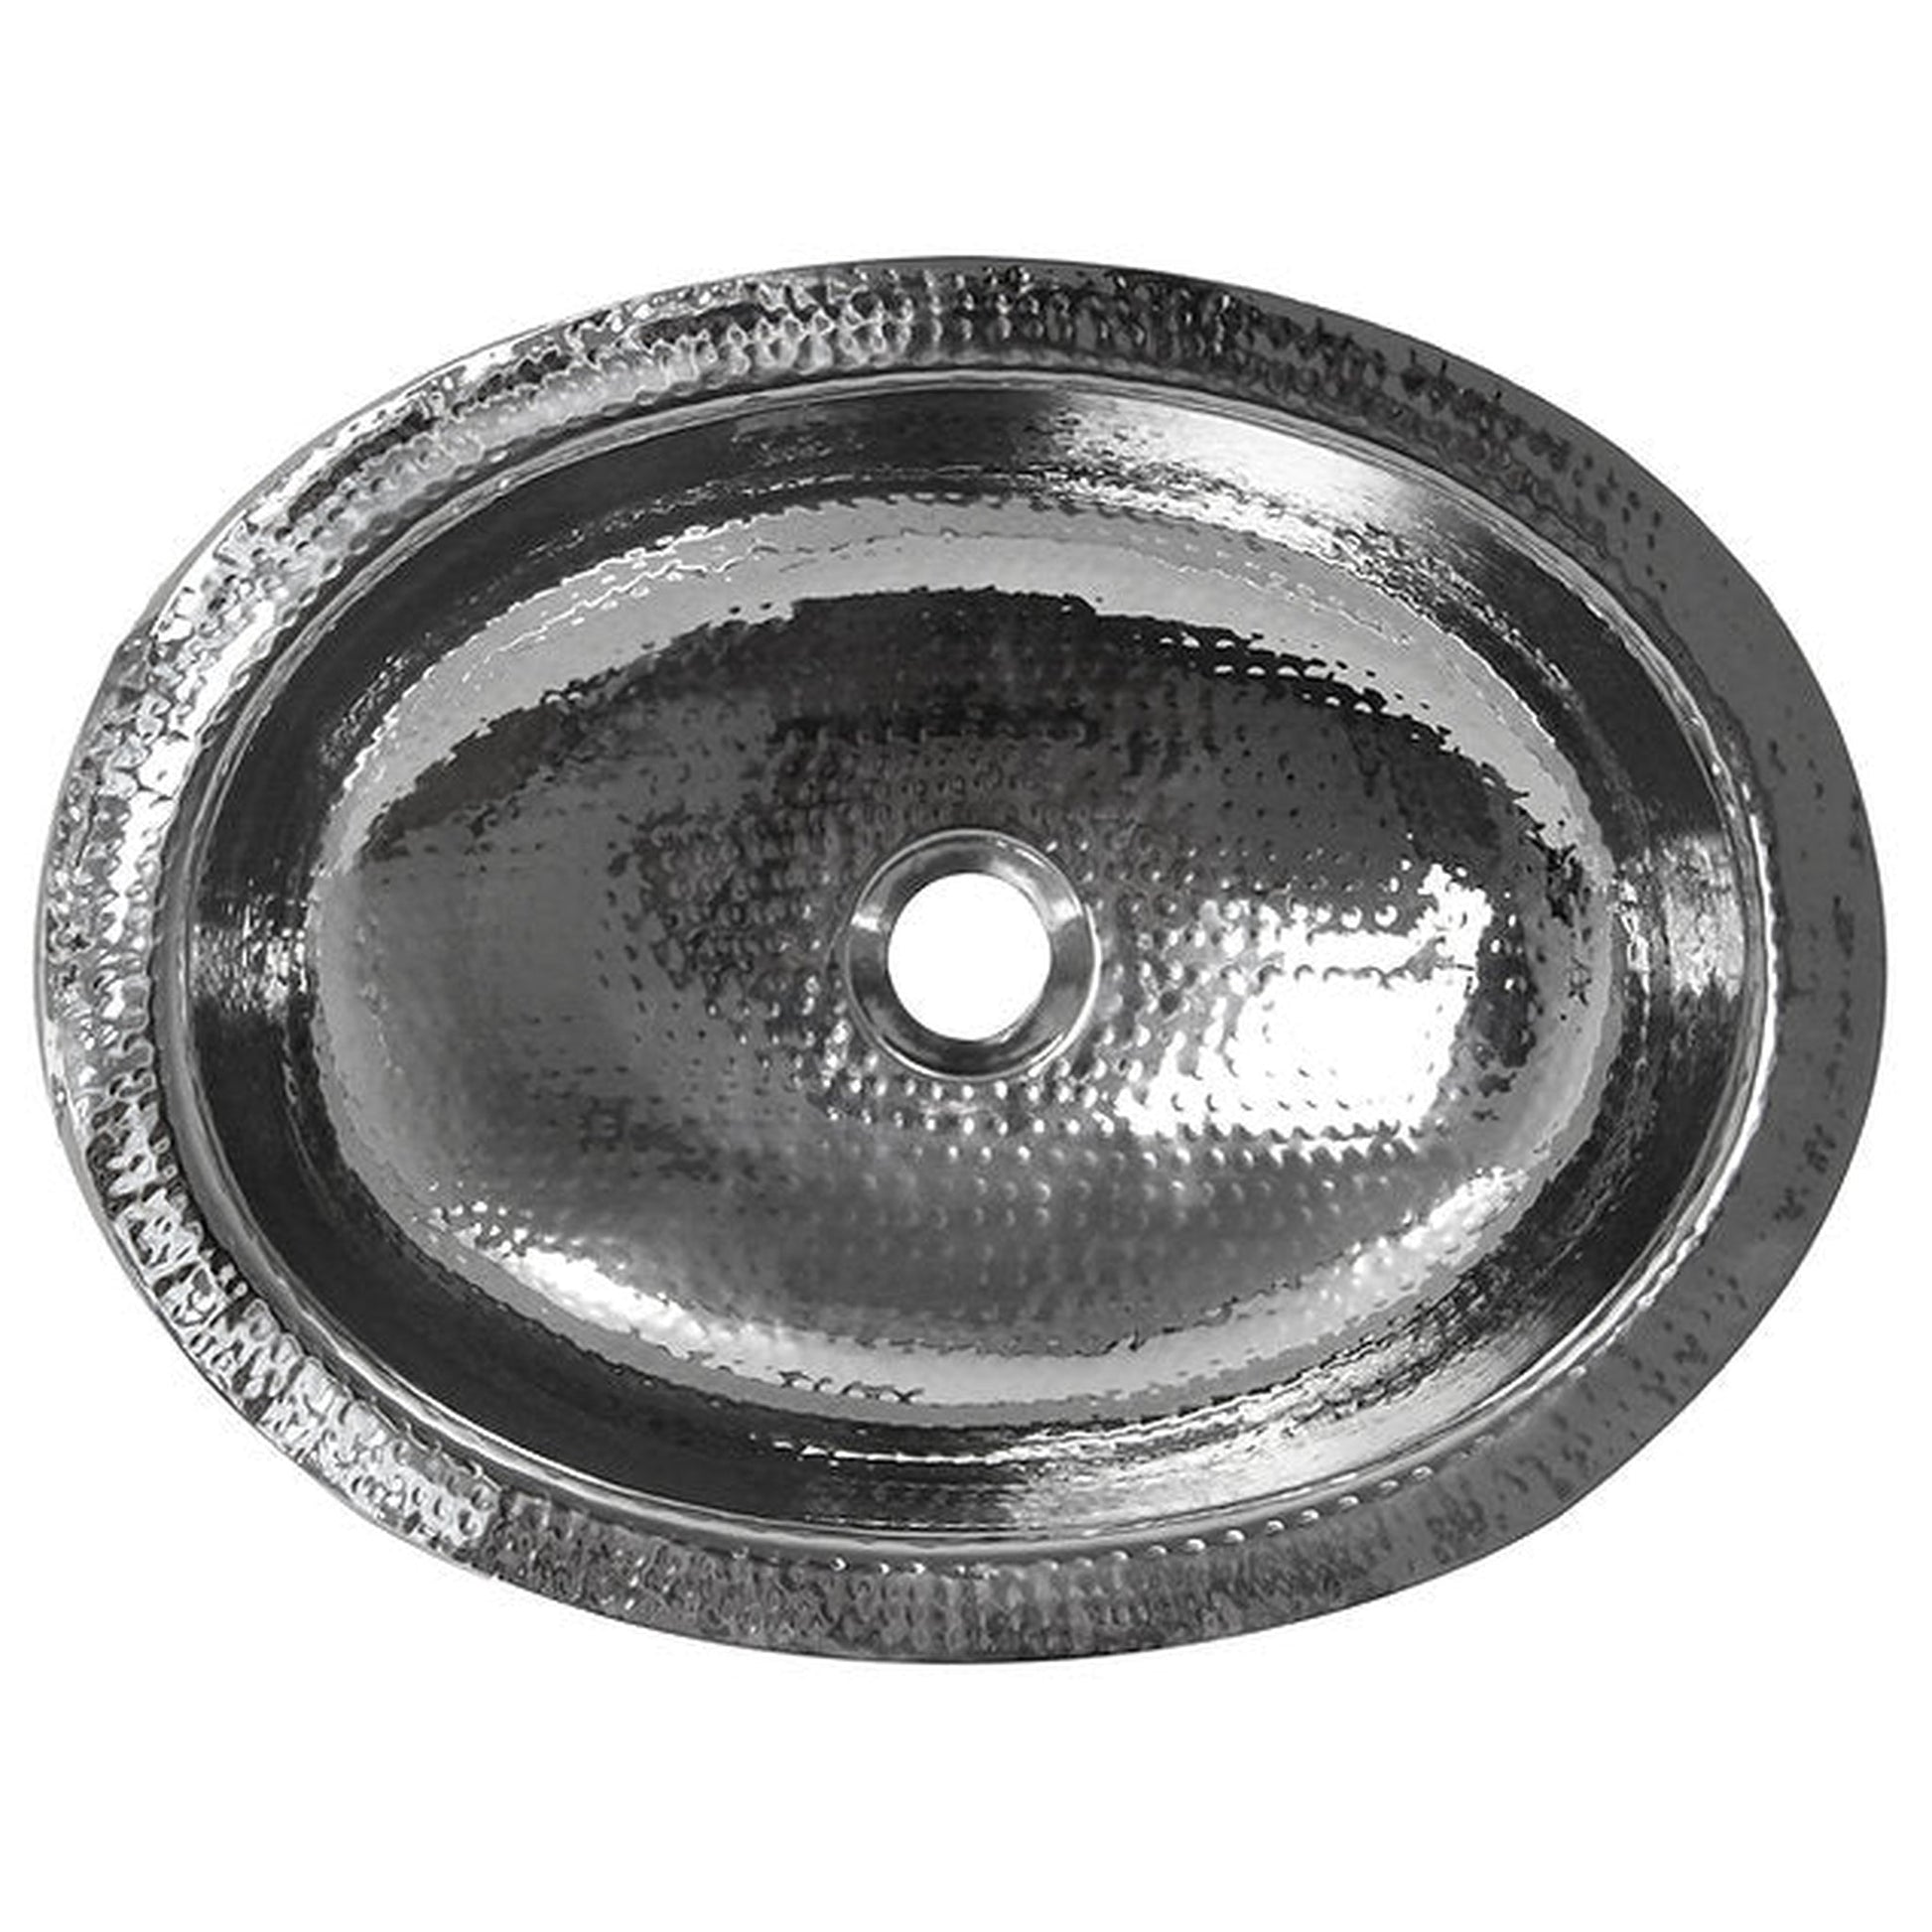 Nantucket Sinks Brightwork Home 18" W x 14" D Hand Hammered Oval Polished Stainless Steel Undermount Sink